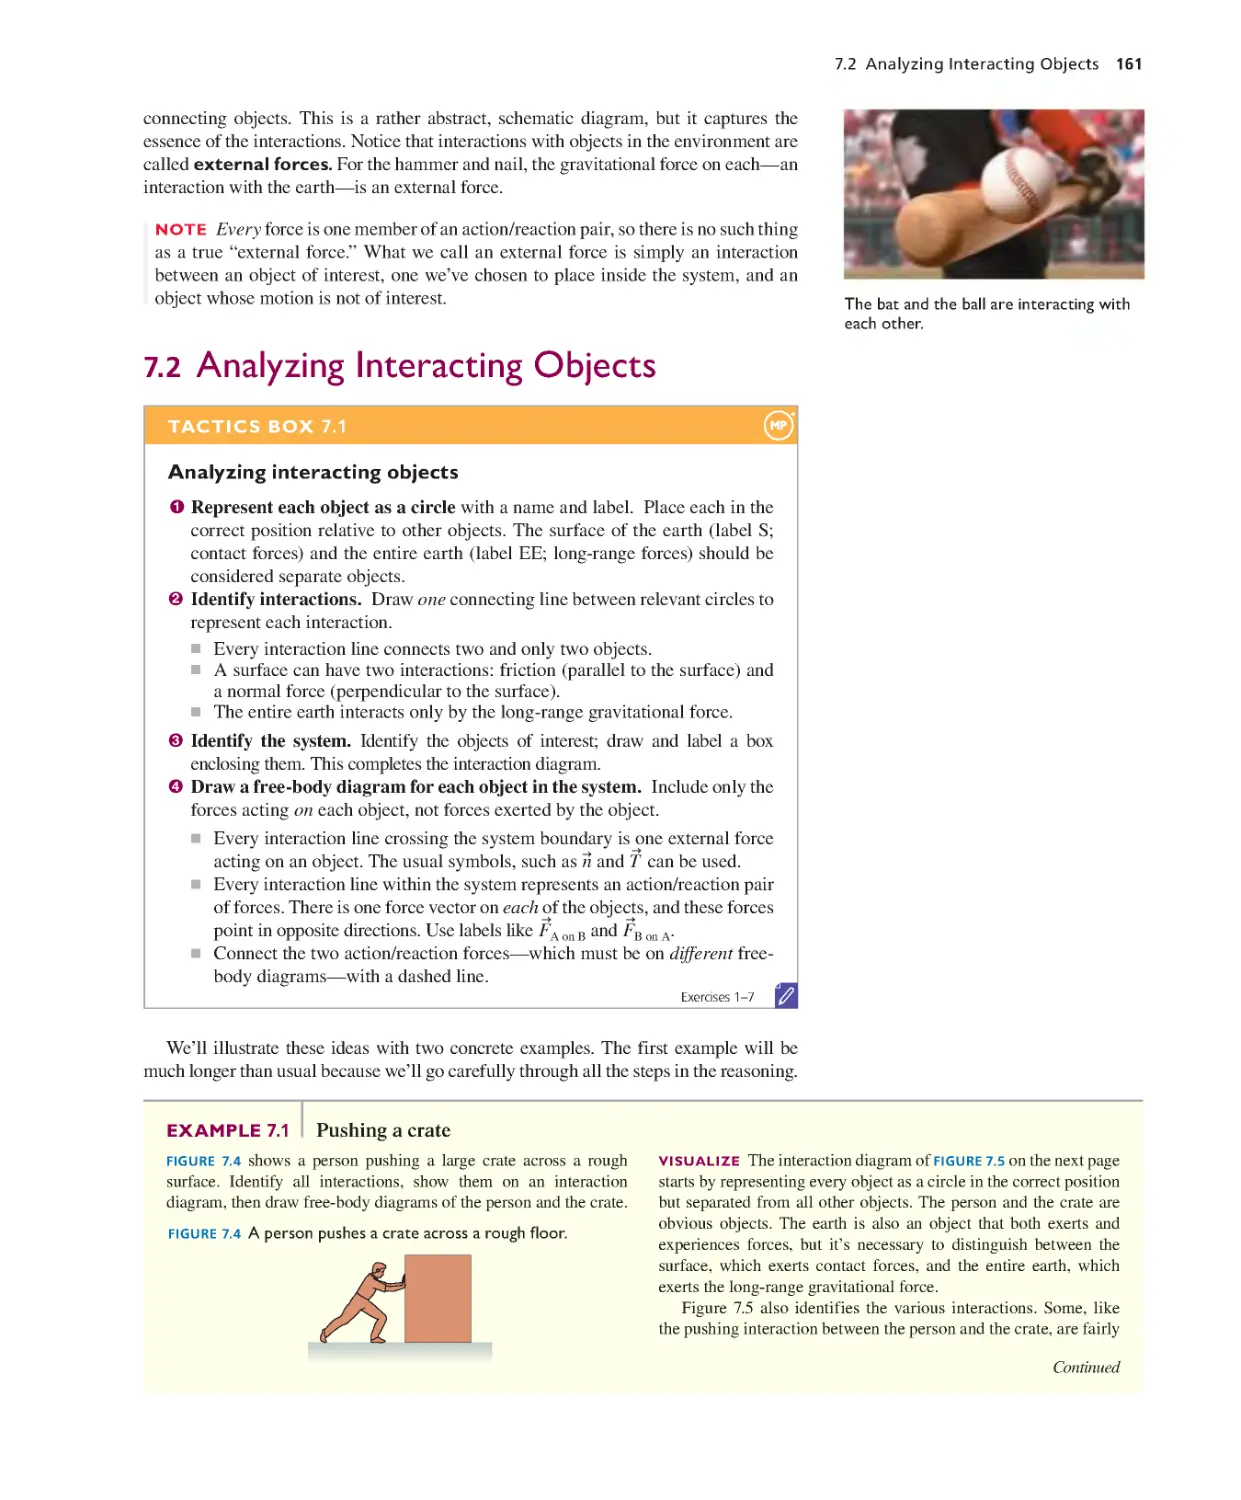 7.2. Analyzing Interacting Objects